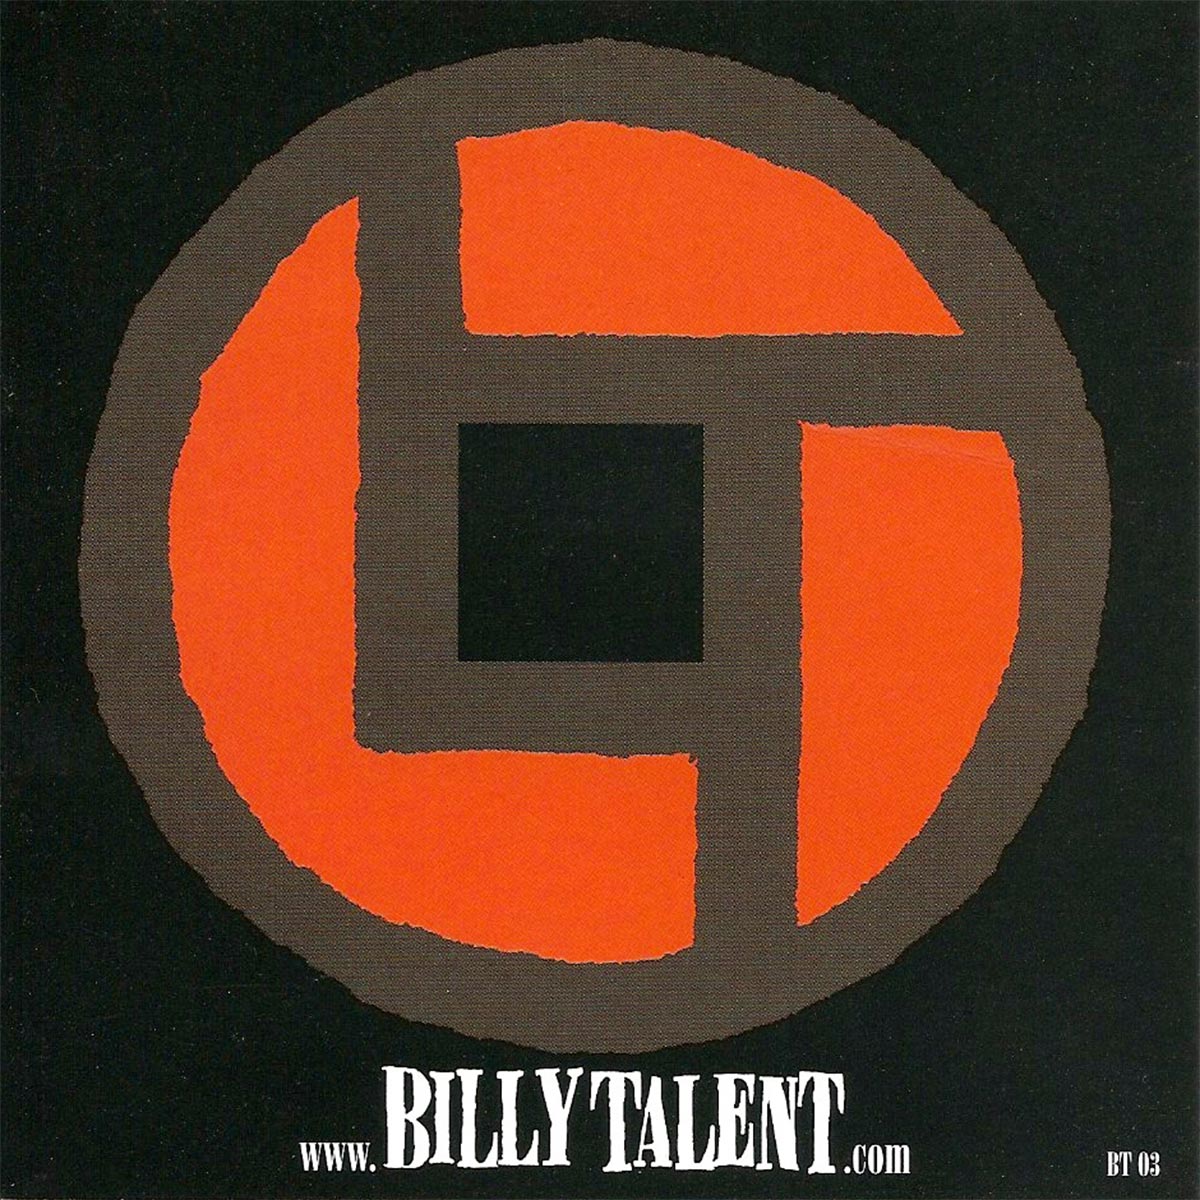 Discographie - Billy Talent - Living in the Shadows / Prisoners of Today - Single